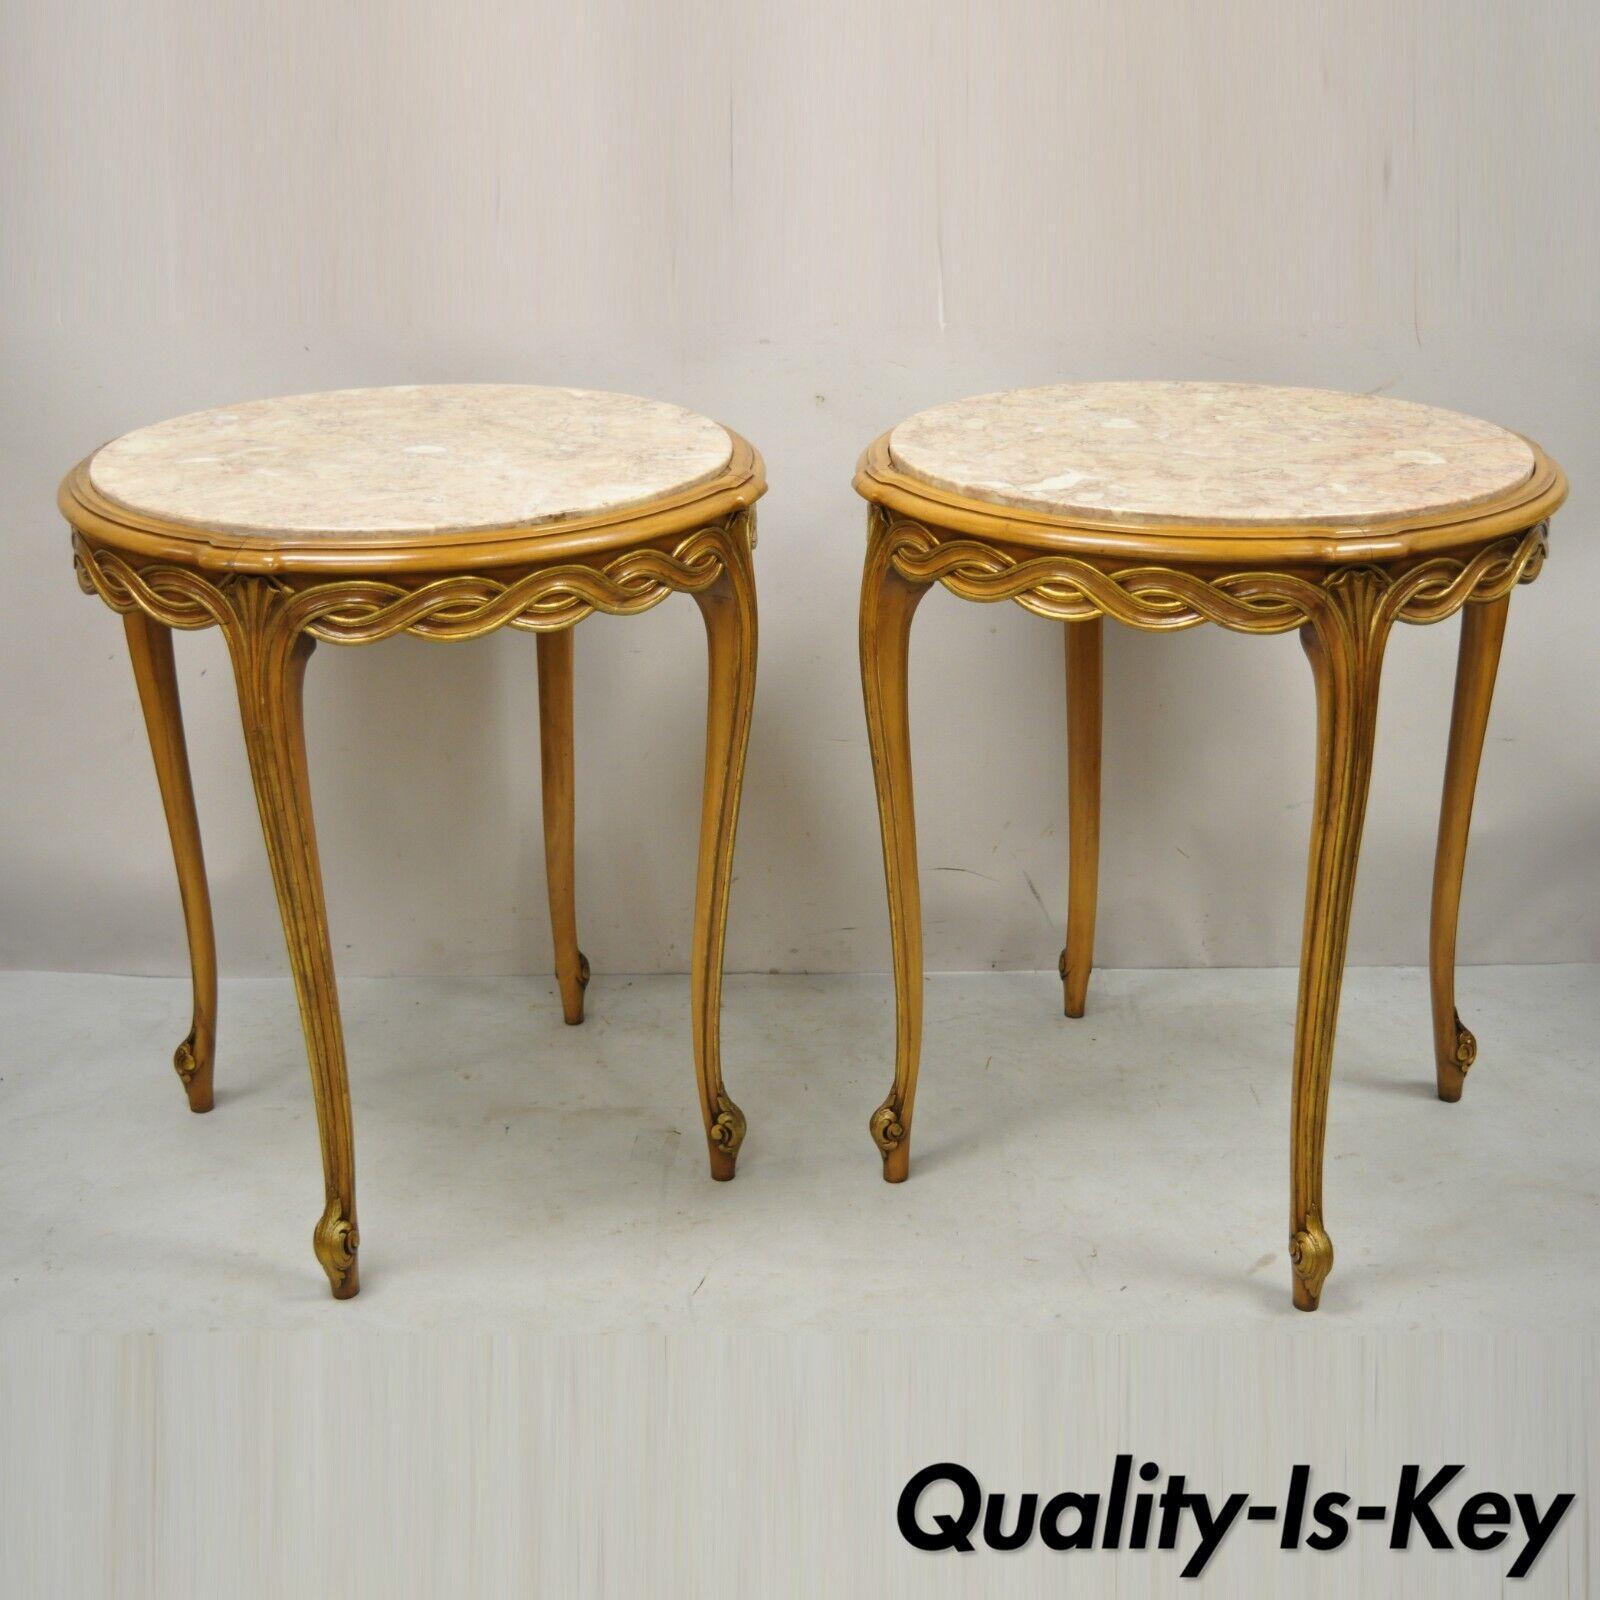 Vintage French Provincial Hollywood Regency round pink marble top side tables - a pair. Item features round pink marble tops, gold gilt accents, woven and shell carved skirt, solid wood frames, cabriole legs, very nice vintage pair. Circa Mid 20th